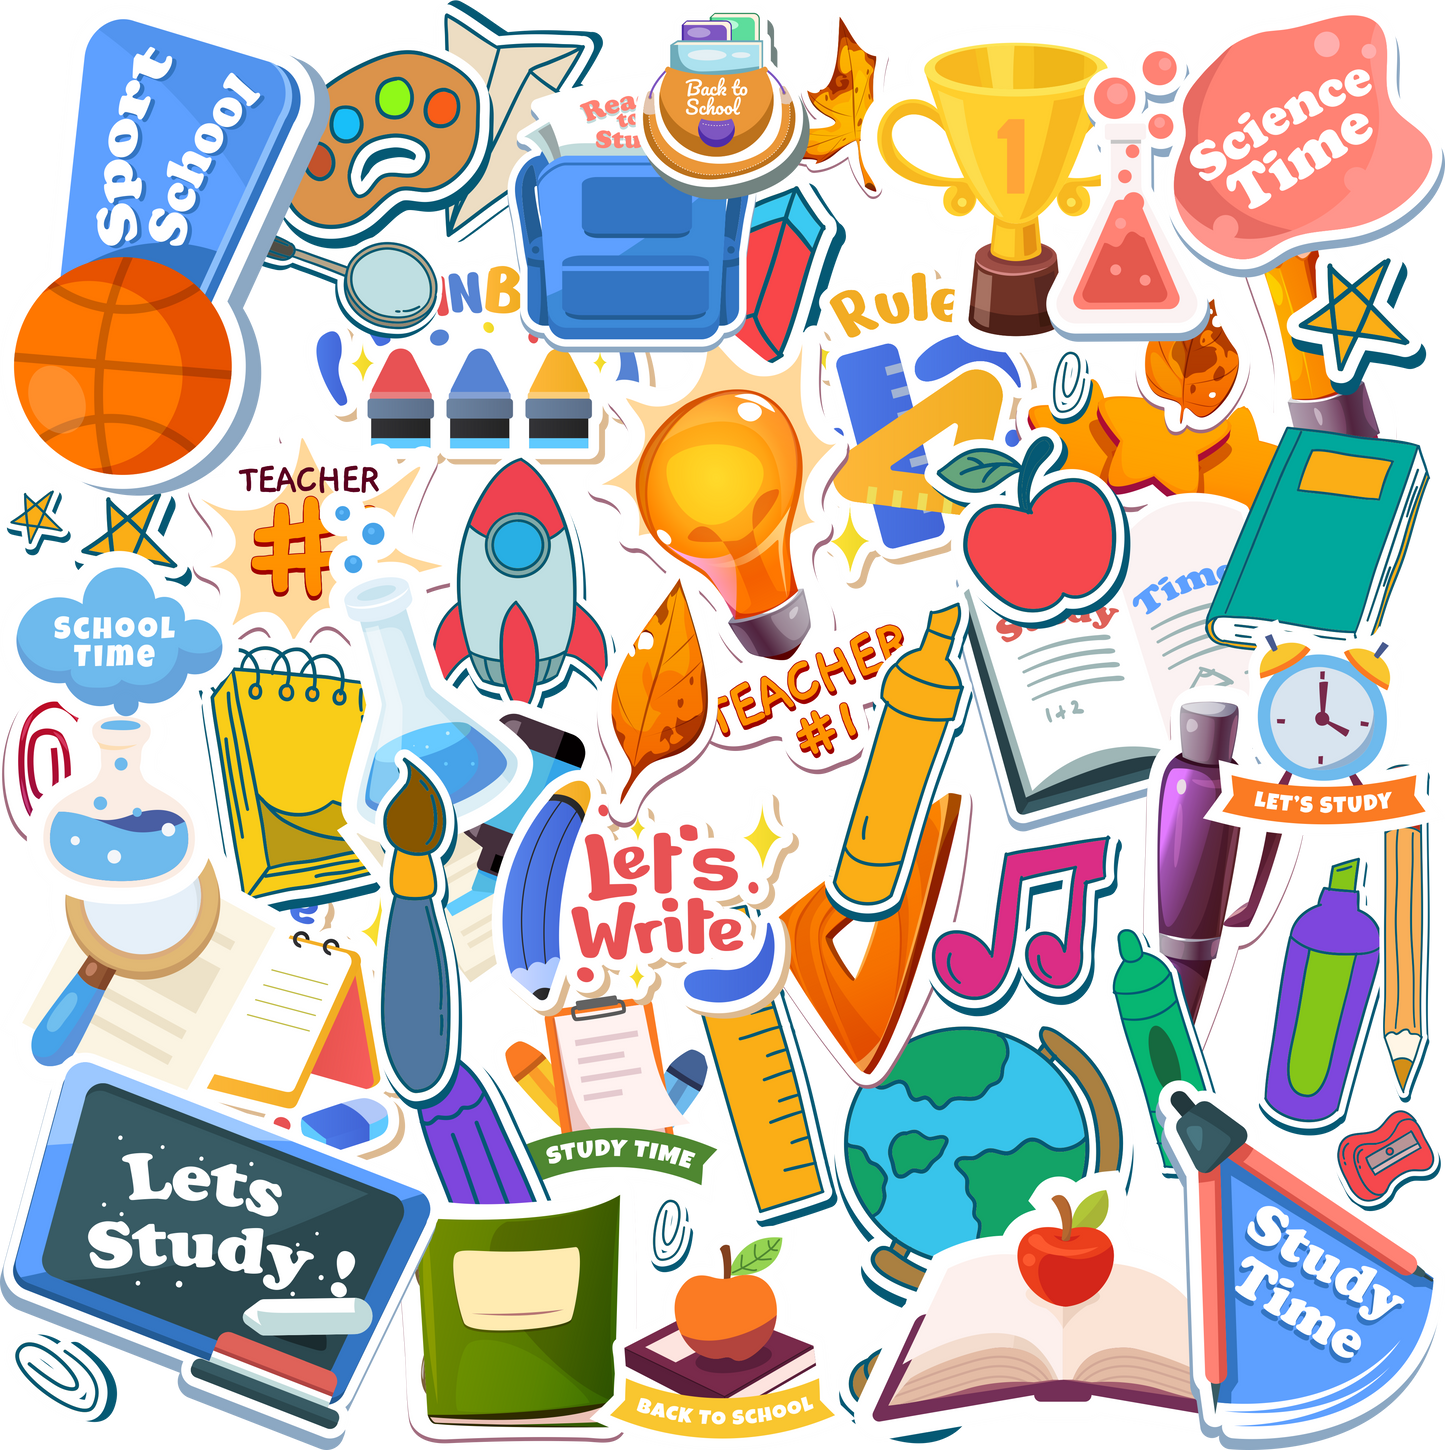 iberry's 50 pcs Stickers for Laptop Phones Computer Bicycle Luggage Scrapbooks Gadgets Waterproof Stickers|Stickers for Students| School Themed| College Stickers-Set of 50 Stickers (08)